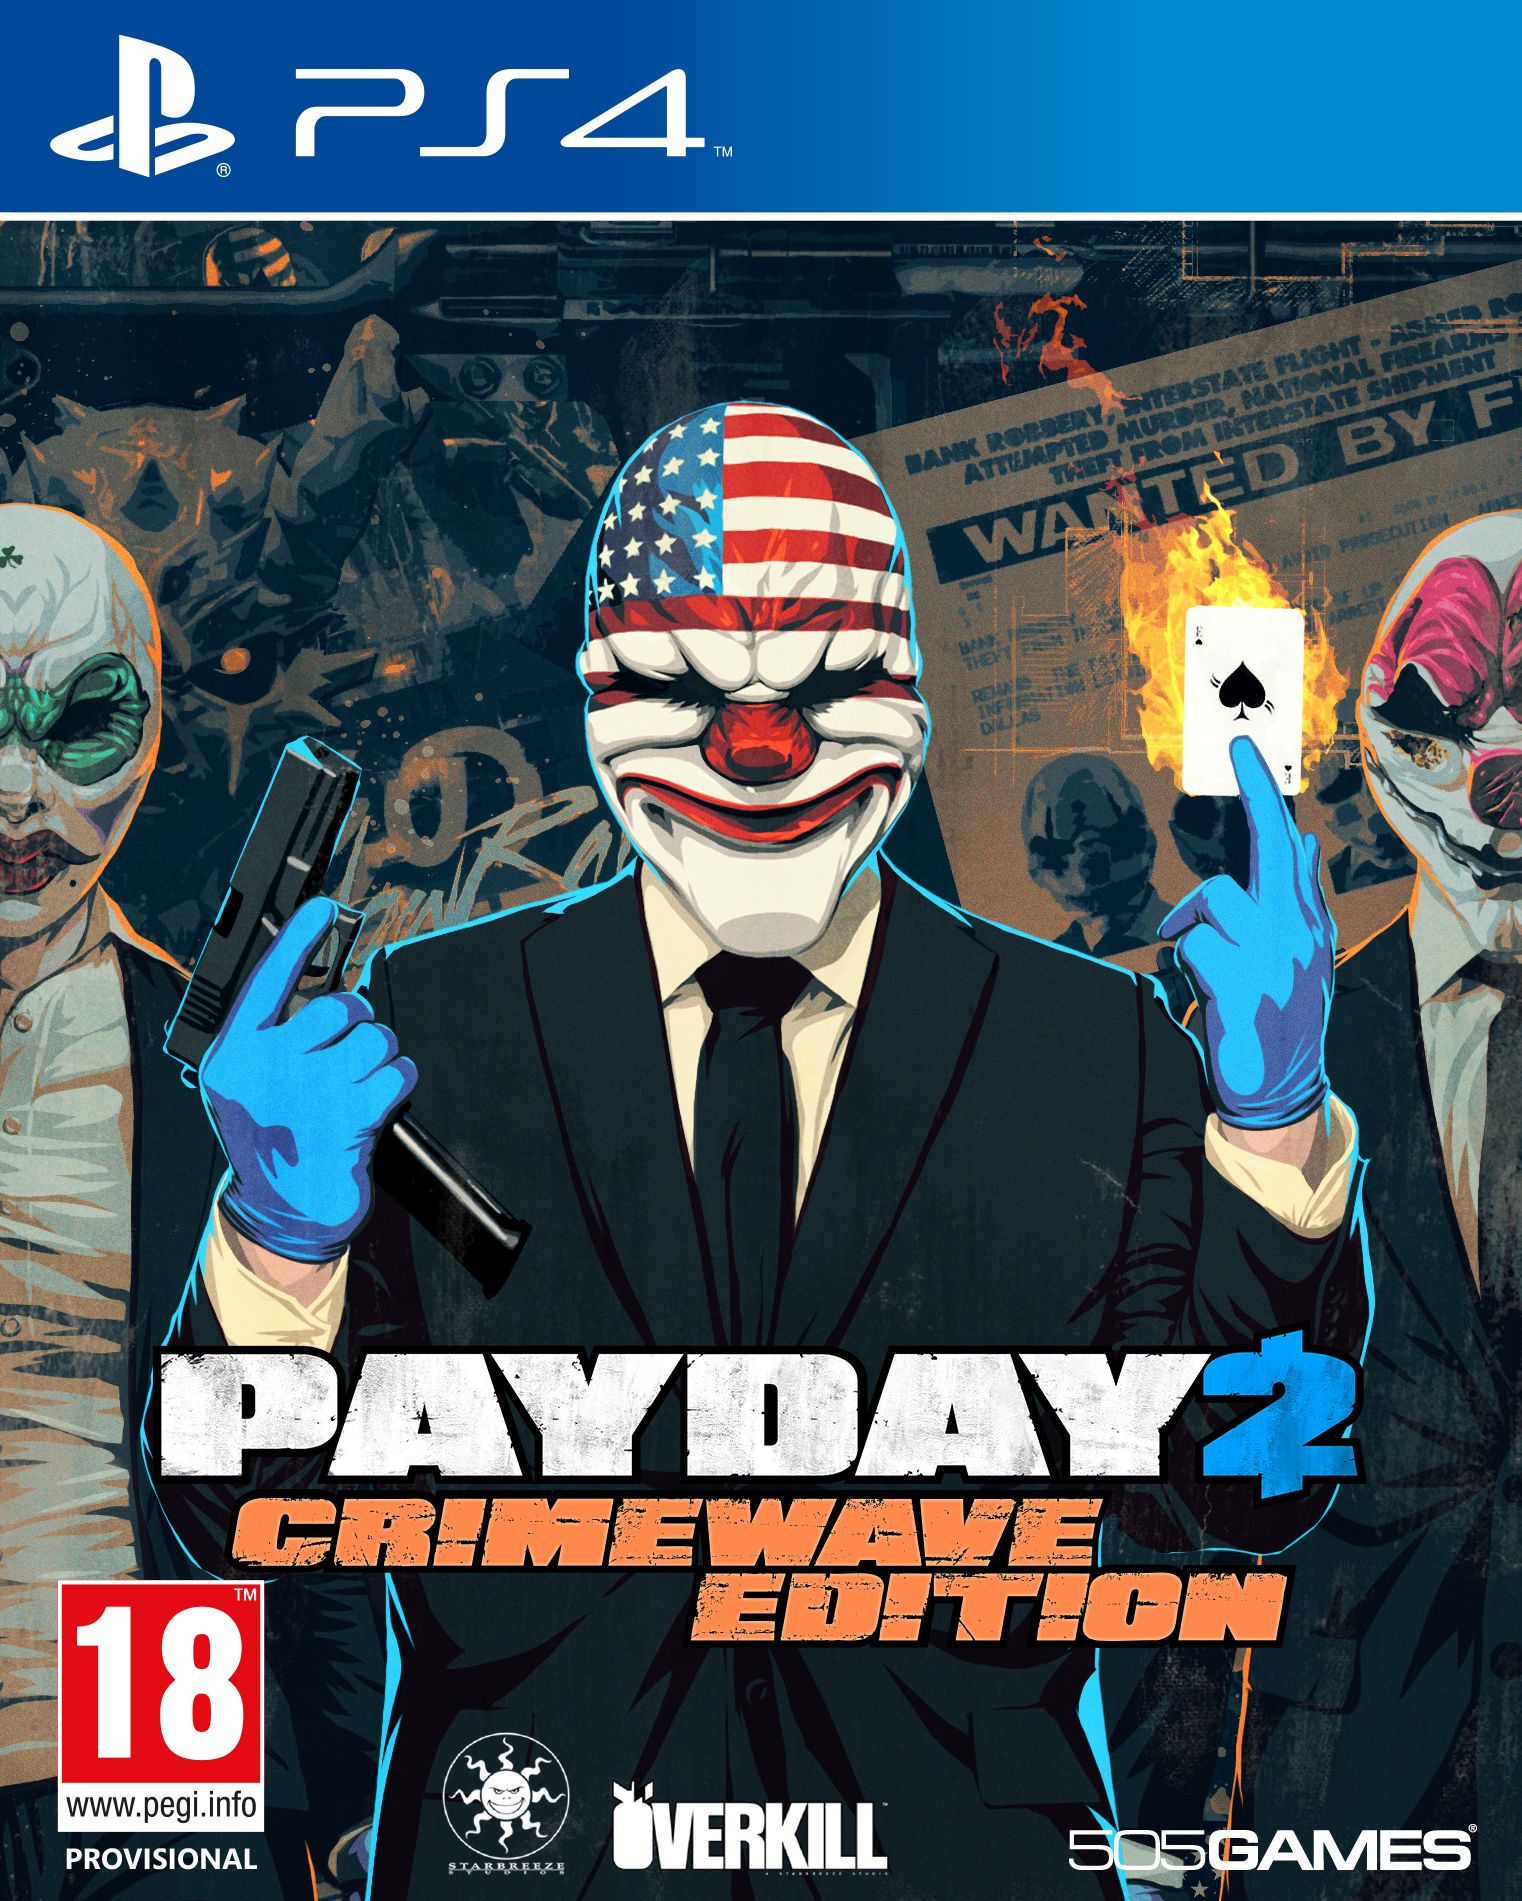 PayDay 2 Crime Wave Edition